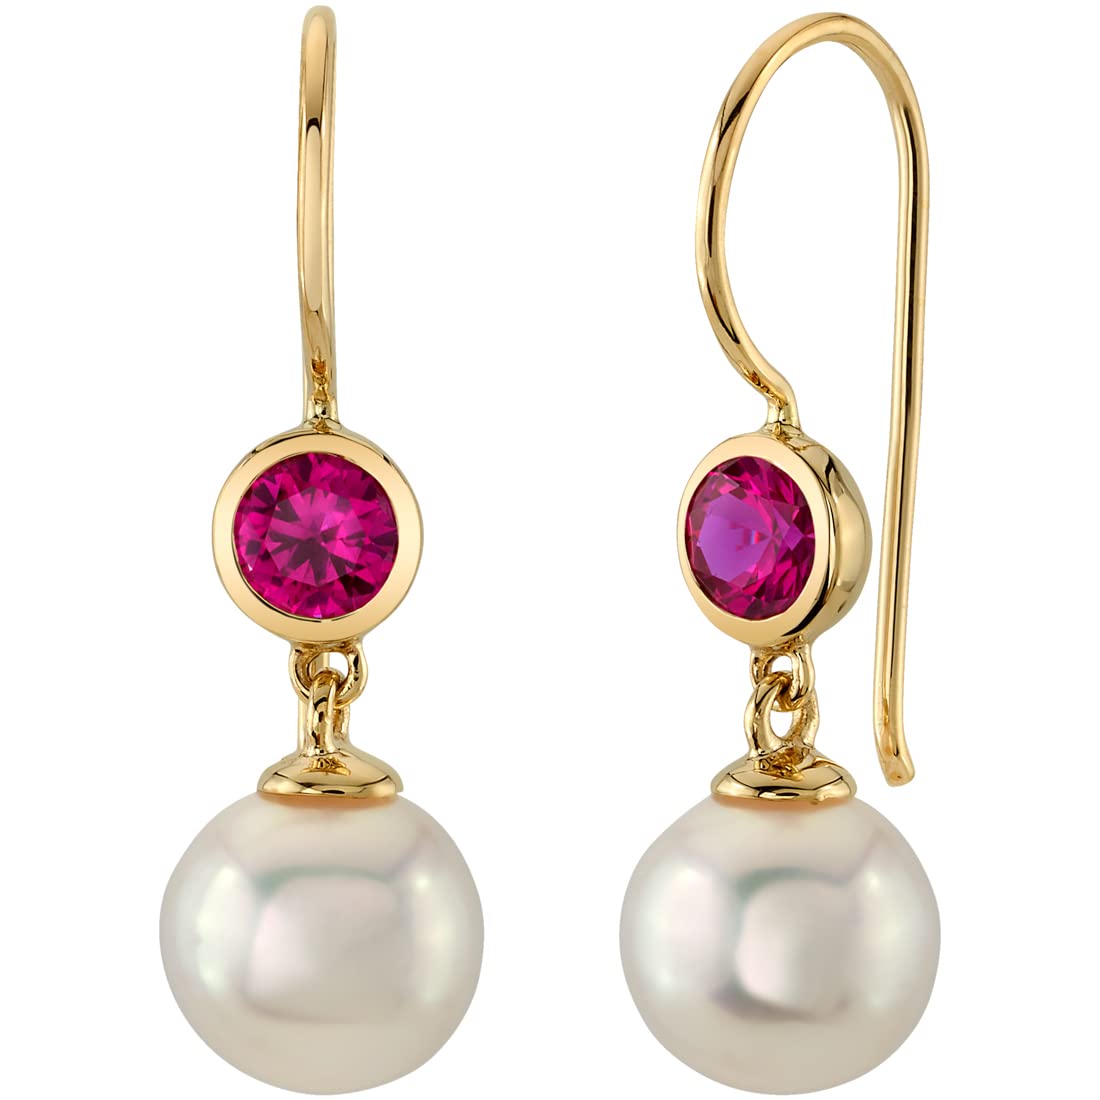 Peora 14K Yellow Gold 8mm Freshwater Cultured White Pearl and Created Ruby Drop Earrings for Women, July Birthstone, Fish Hooks